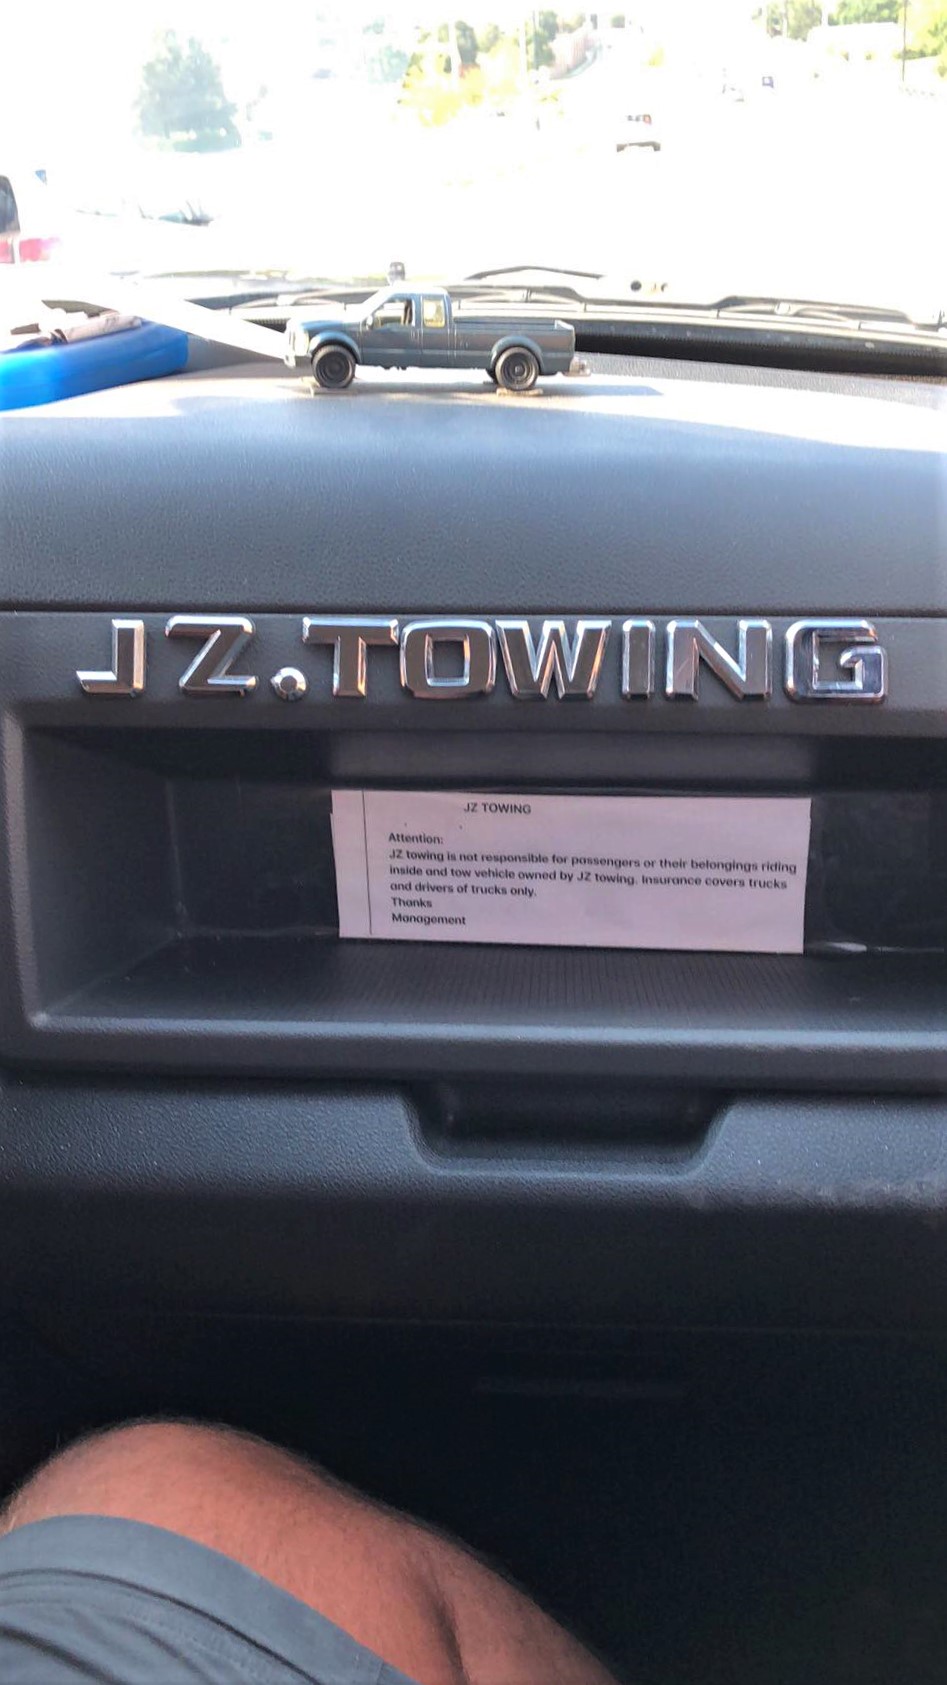 The name JZ Towing on the dashboard of the flatbed truck that we rode in